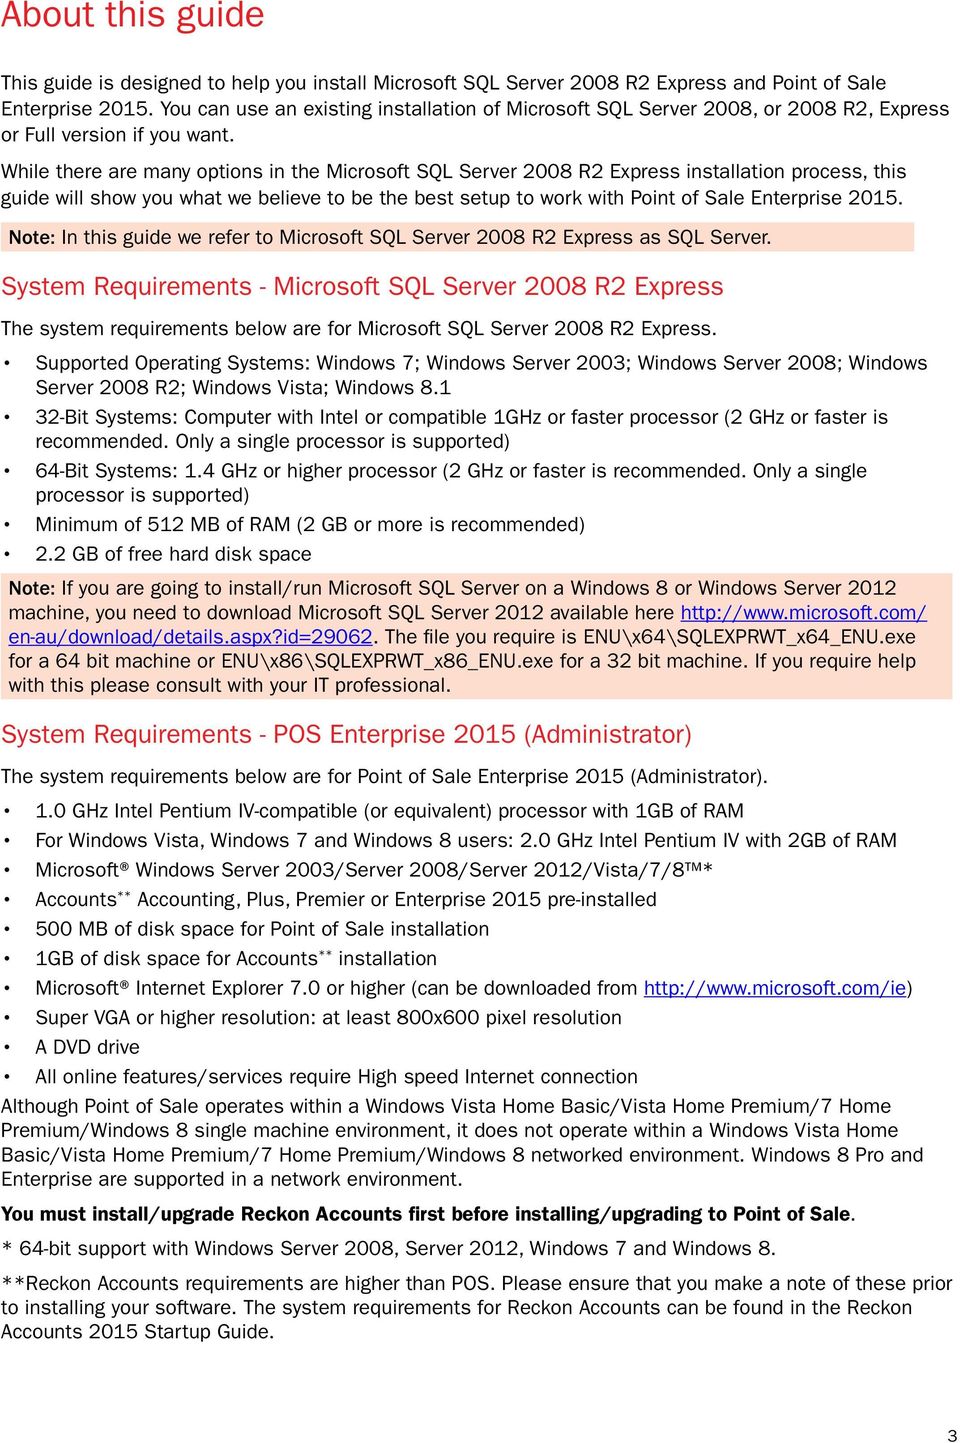 While there are many options in the Microsoft SQL Server 2008 R2 Express installation process, this guide will show you what we believe to be the best setup to work with Point of Sale Enterprise 2015.